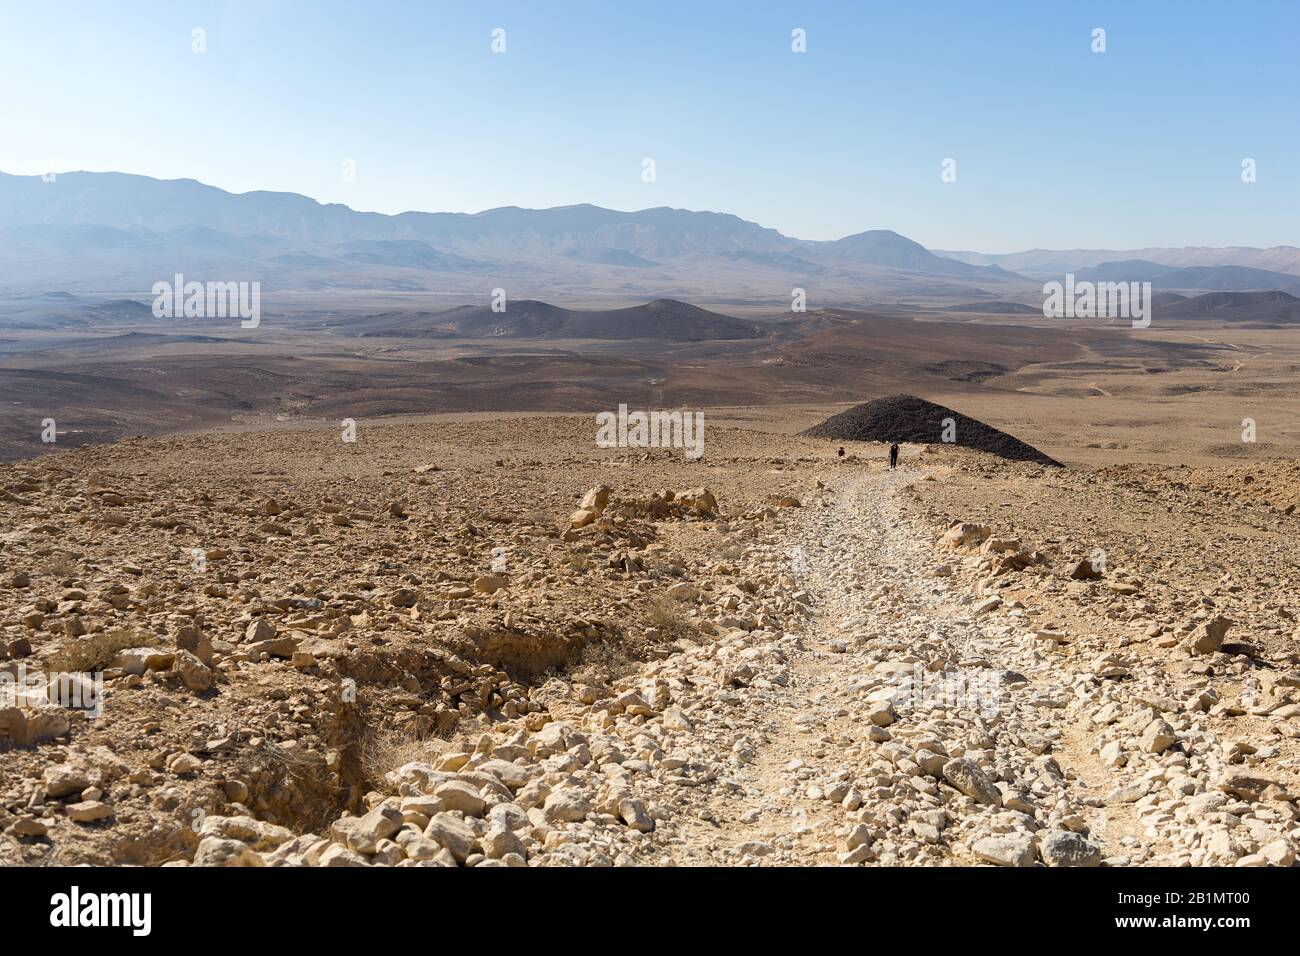 View of ramon crater desert of southern israel during hiking Stock Photo